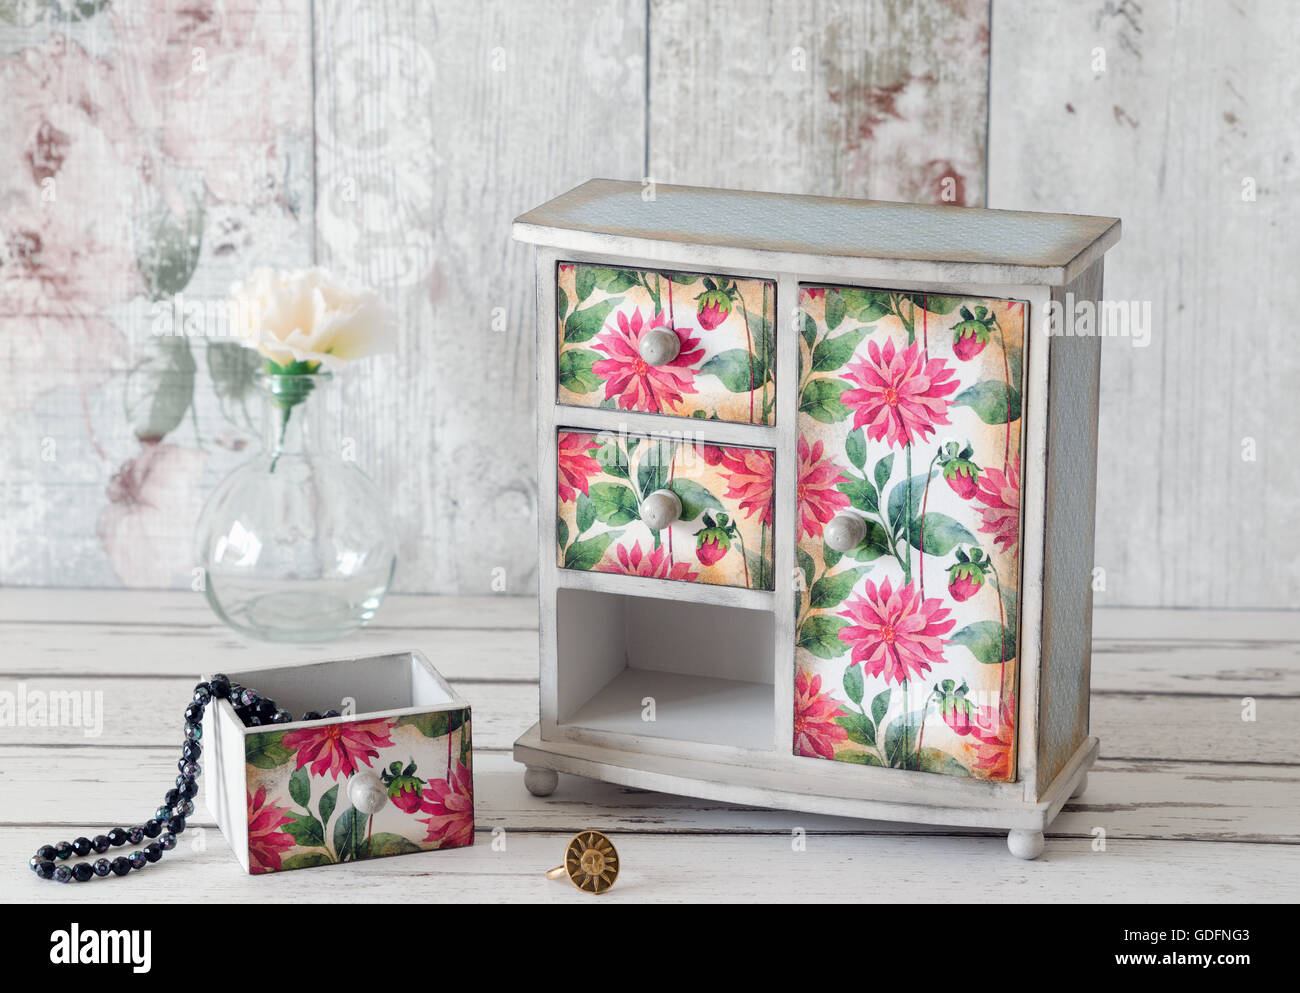 Handmade decoupaged jewellery box in a shabby chic floral style Stock Photo